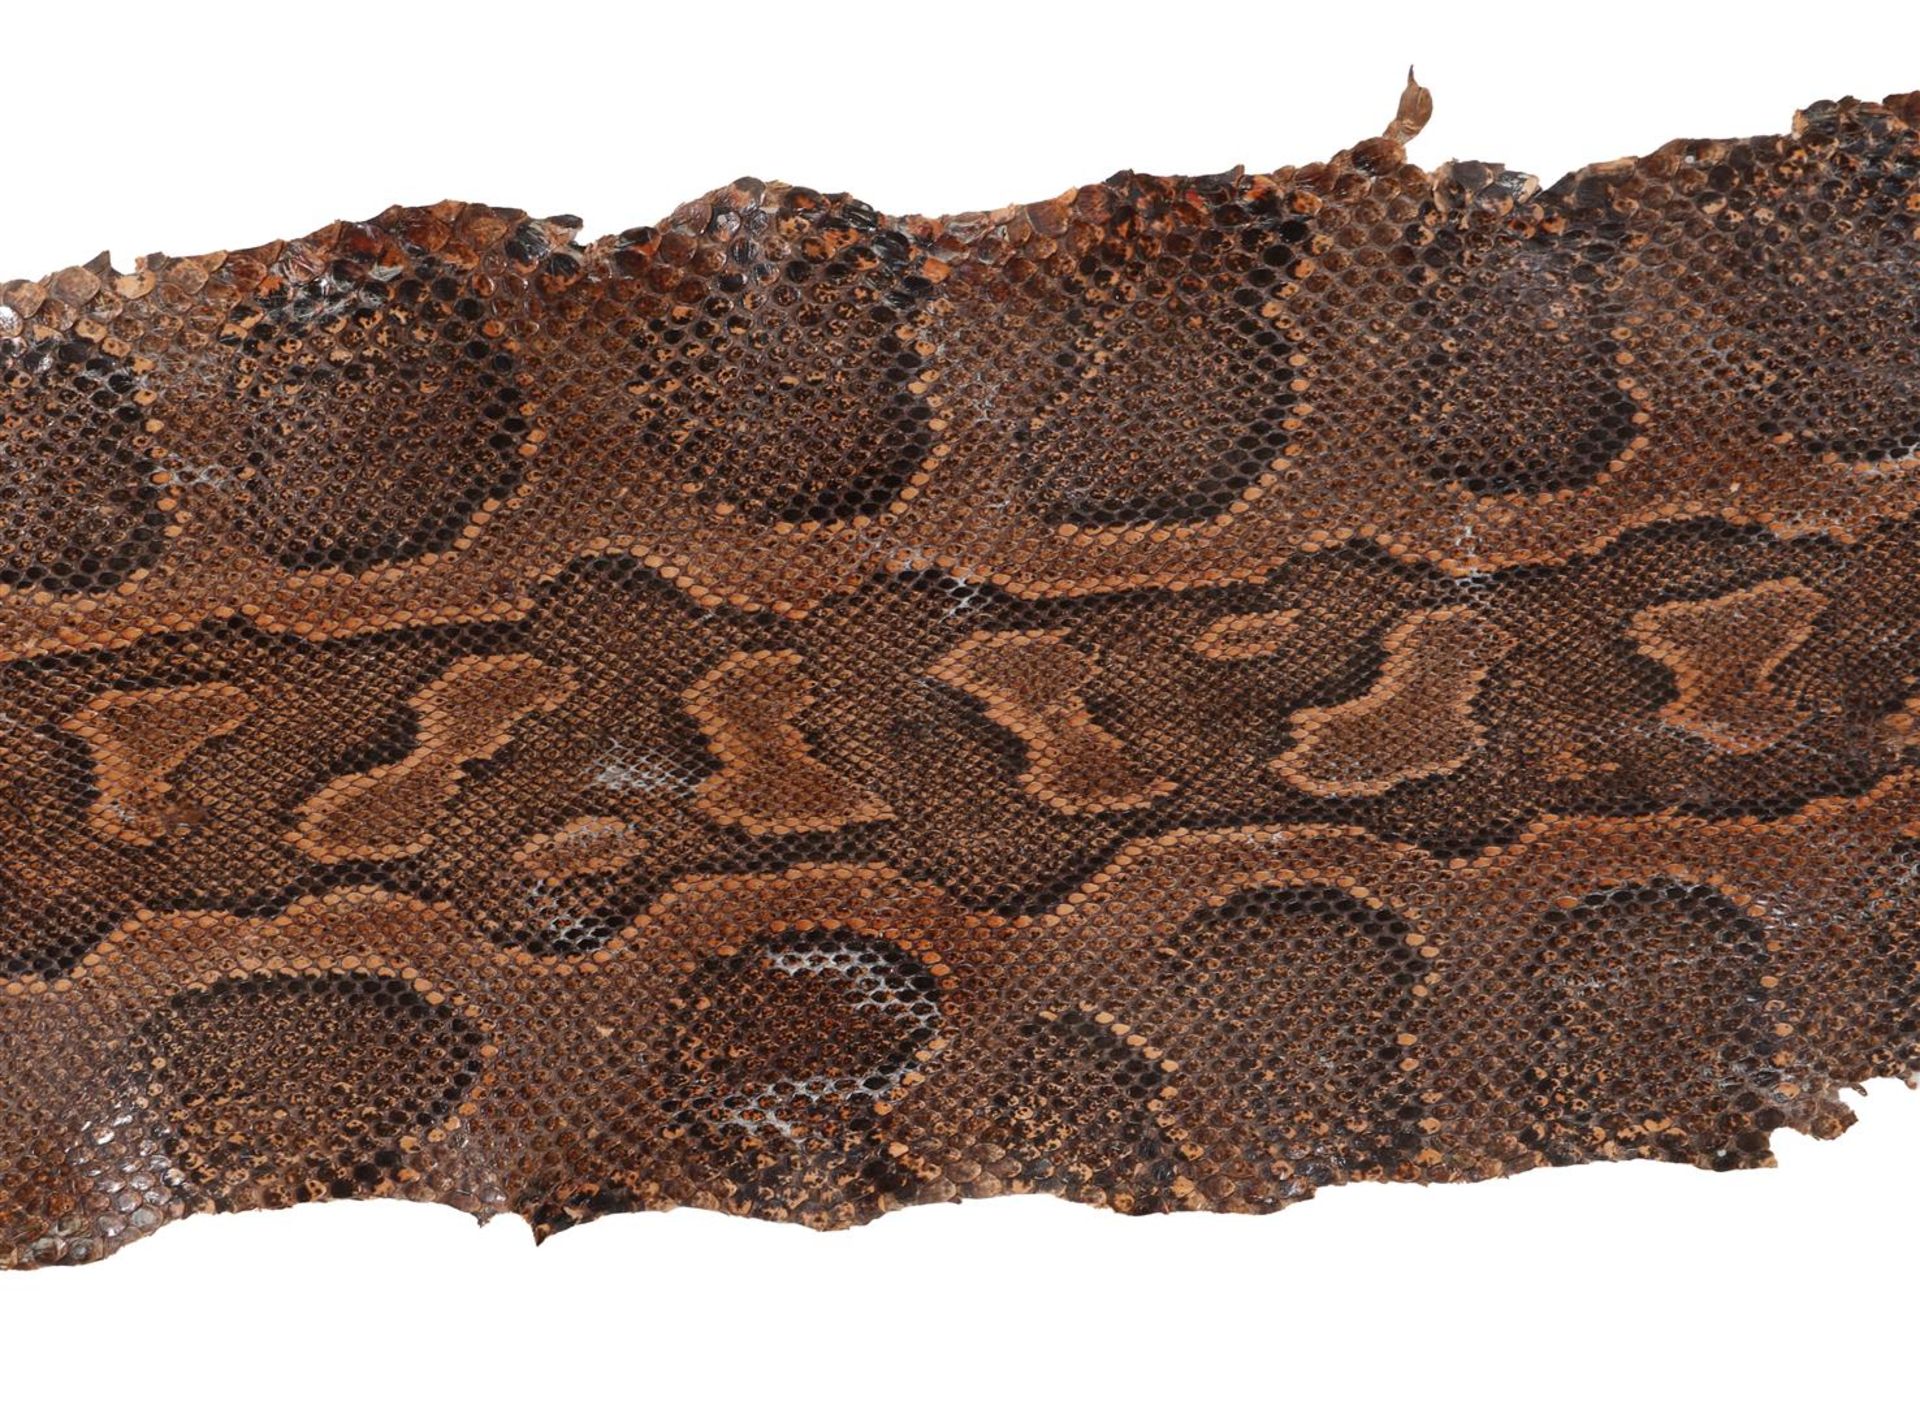 Skin of a python - Image 5 of 8